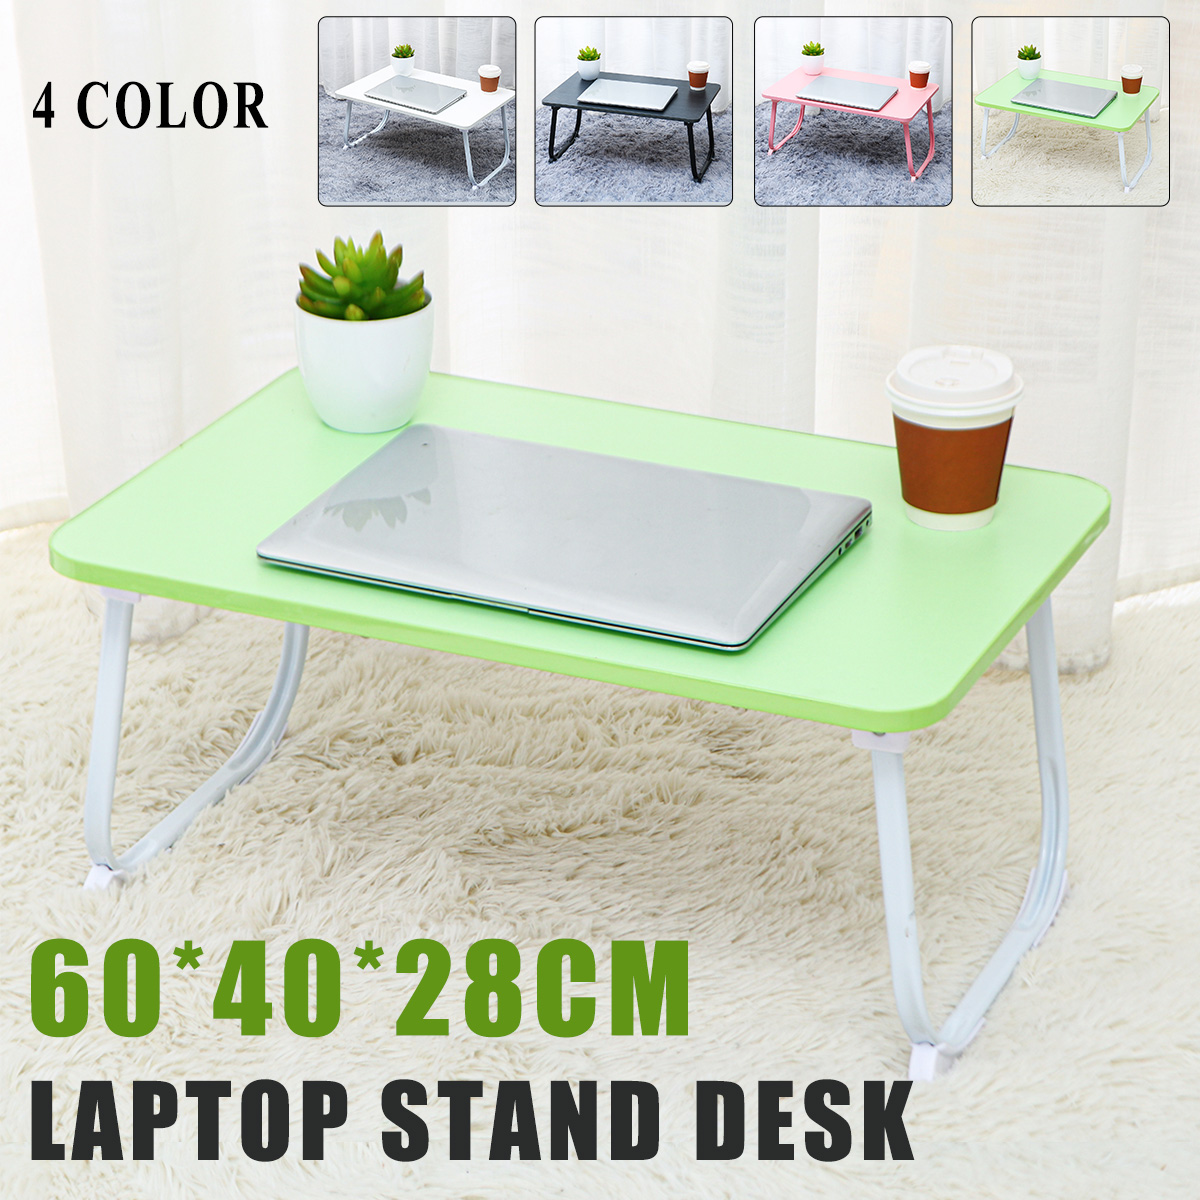 Foldable-Laptop-Desk-Portable-Notebook-Comuter-Table-Study-Table-Bed-Tray-Home-Office-Furniture-1755385-1